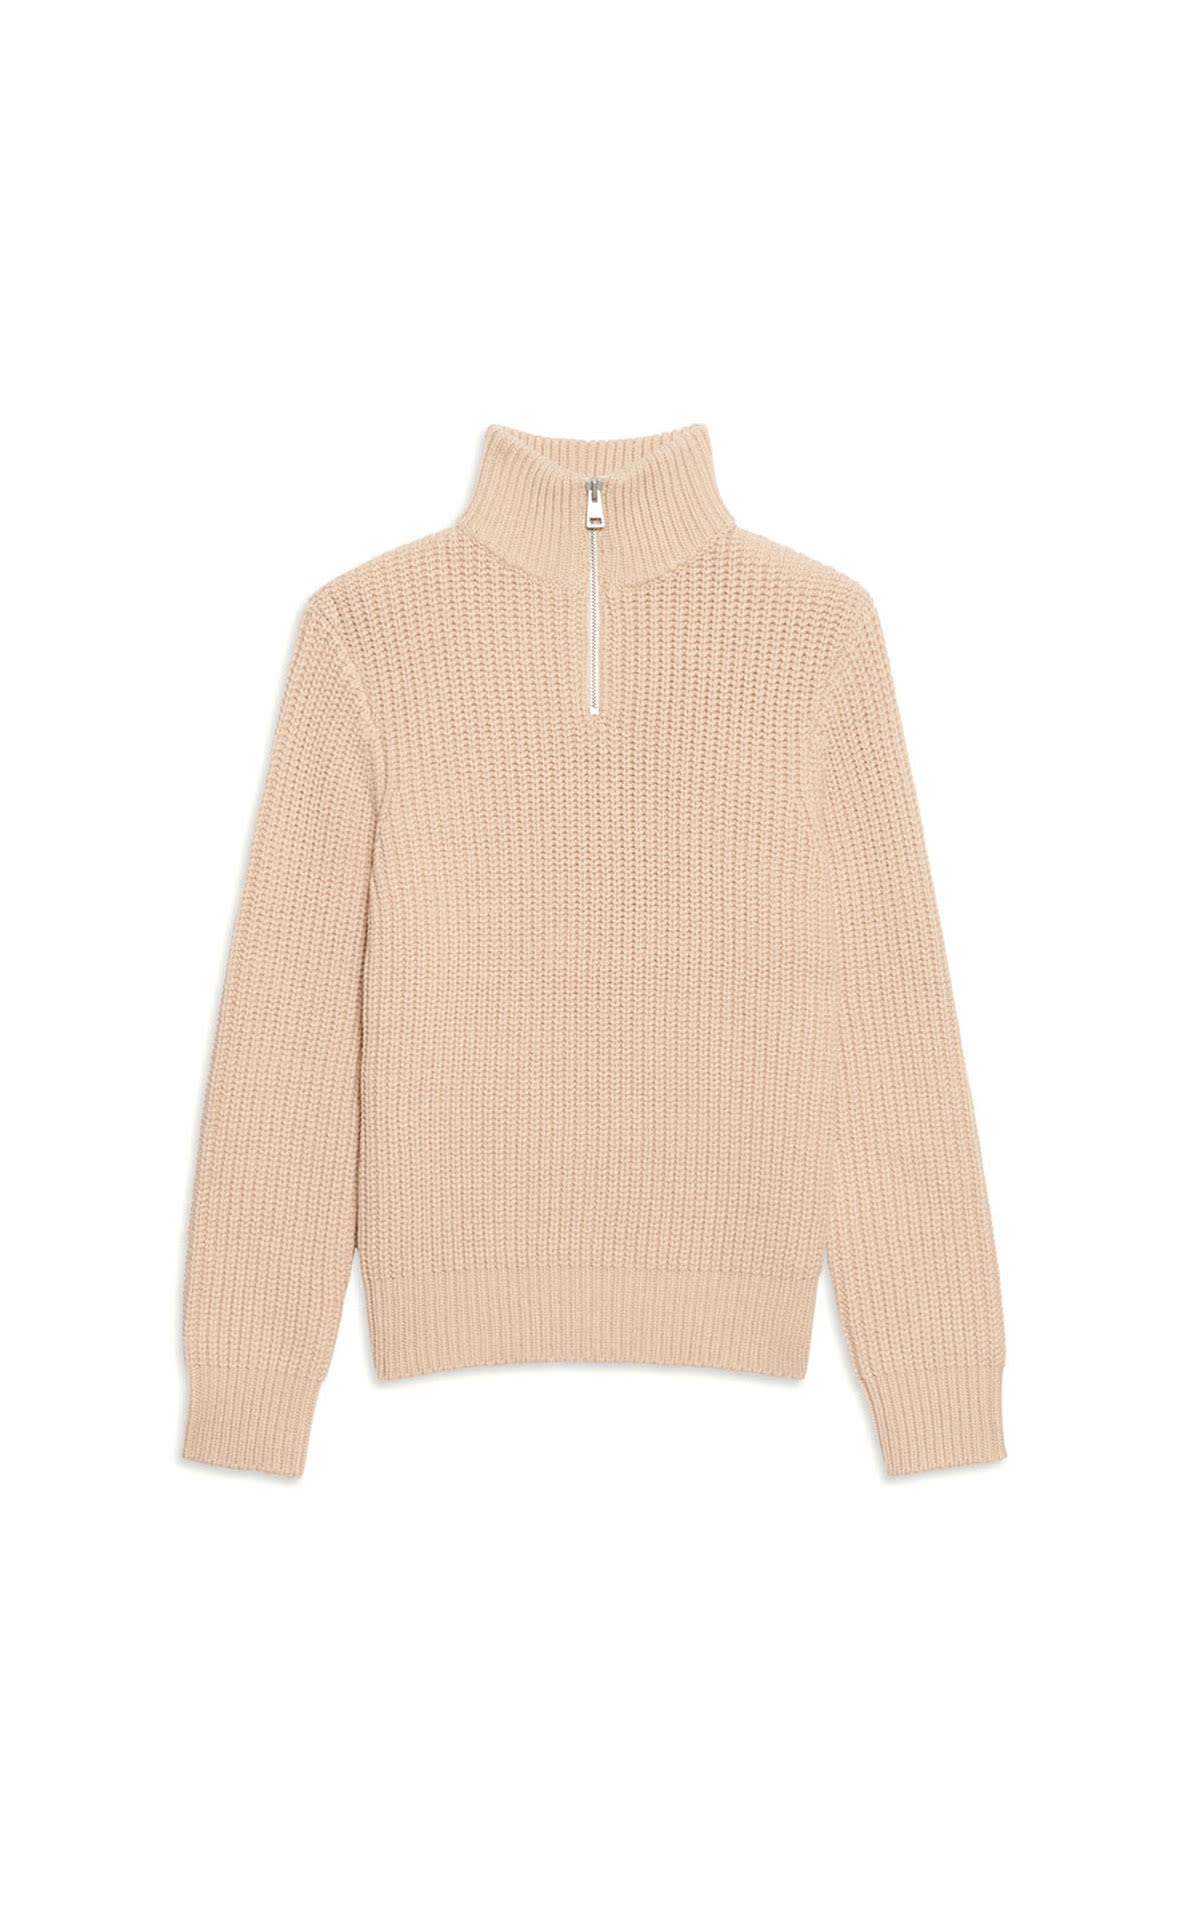 Sandro Half zipped waffle weave sweater from Bicester Village